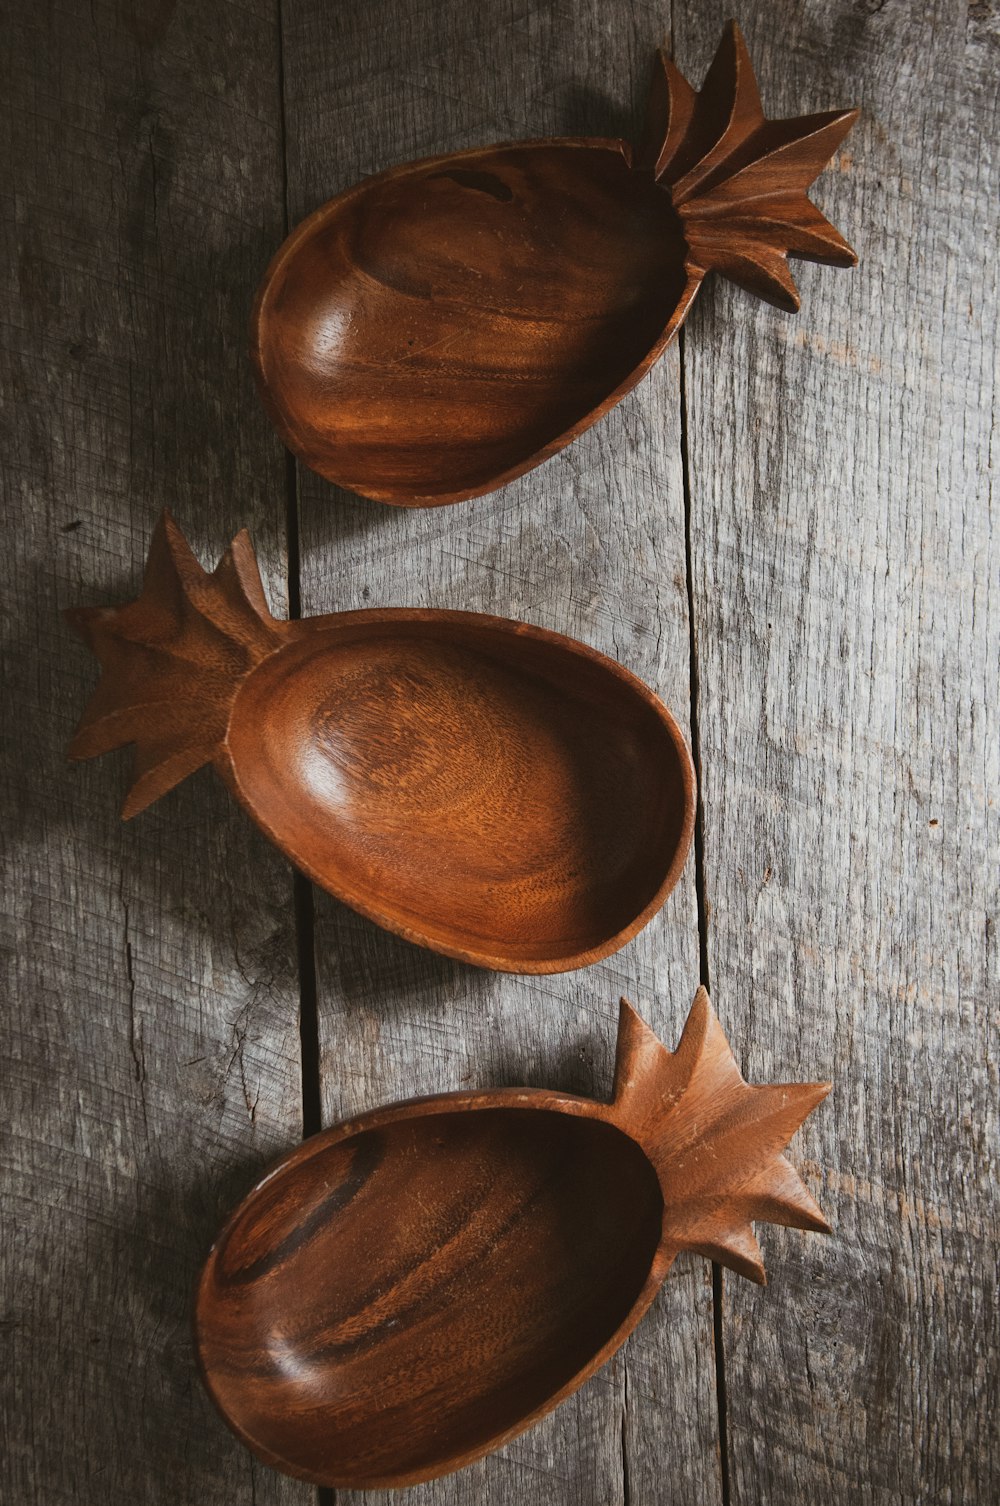 Decorative Bowls Offer A Perfect Choice For Your Home